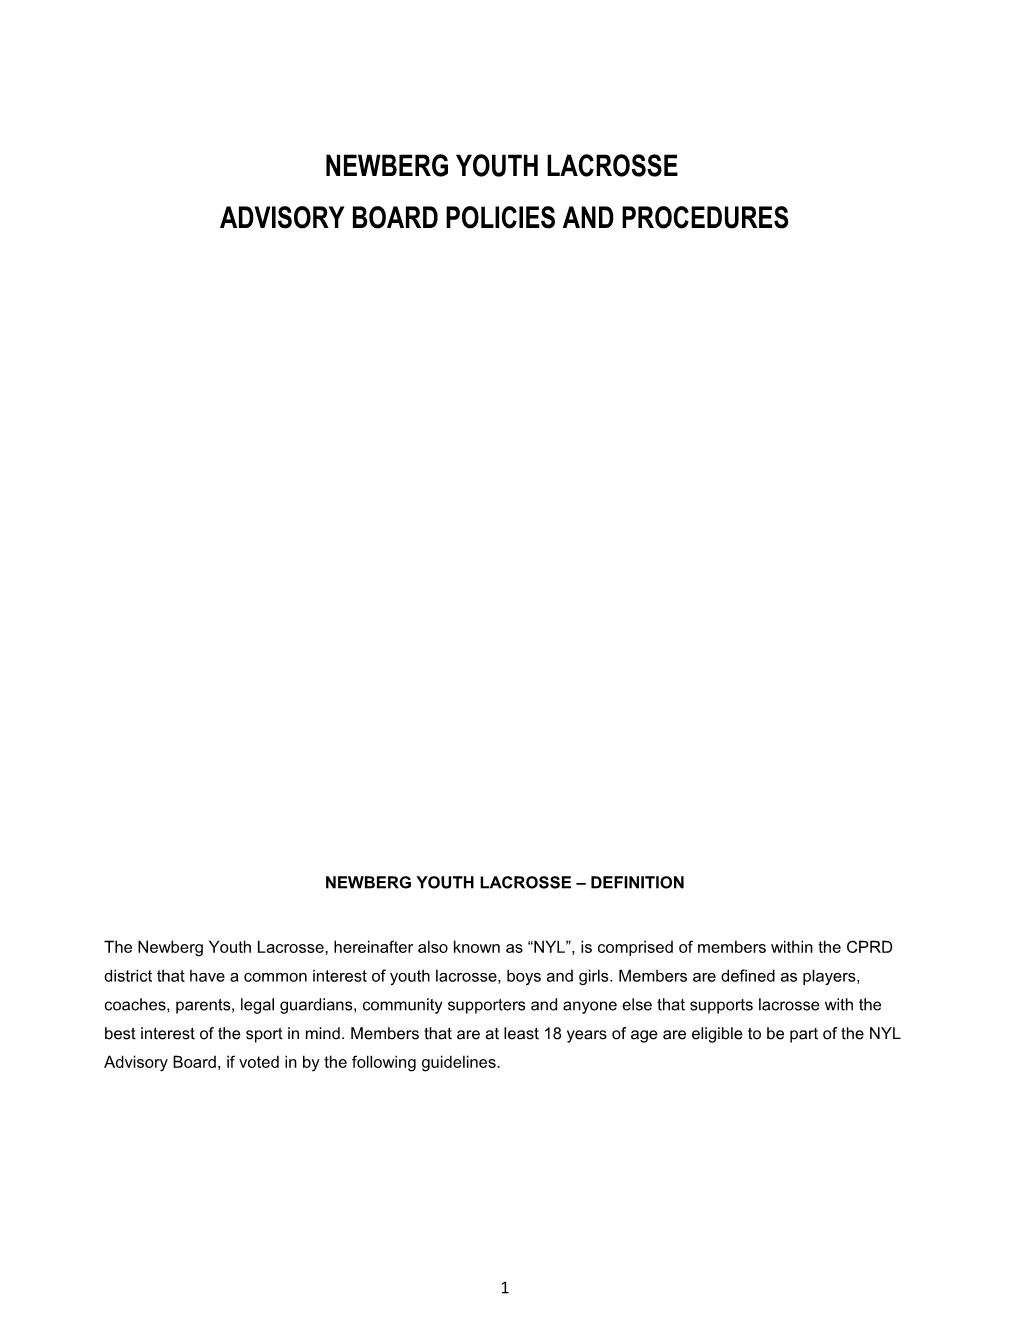 Advisory Board Policies and Procedures